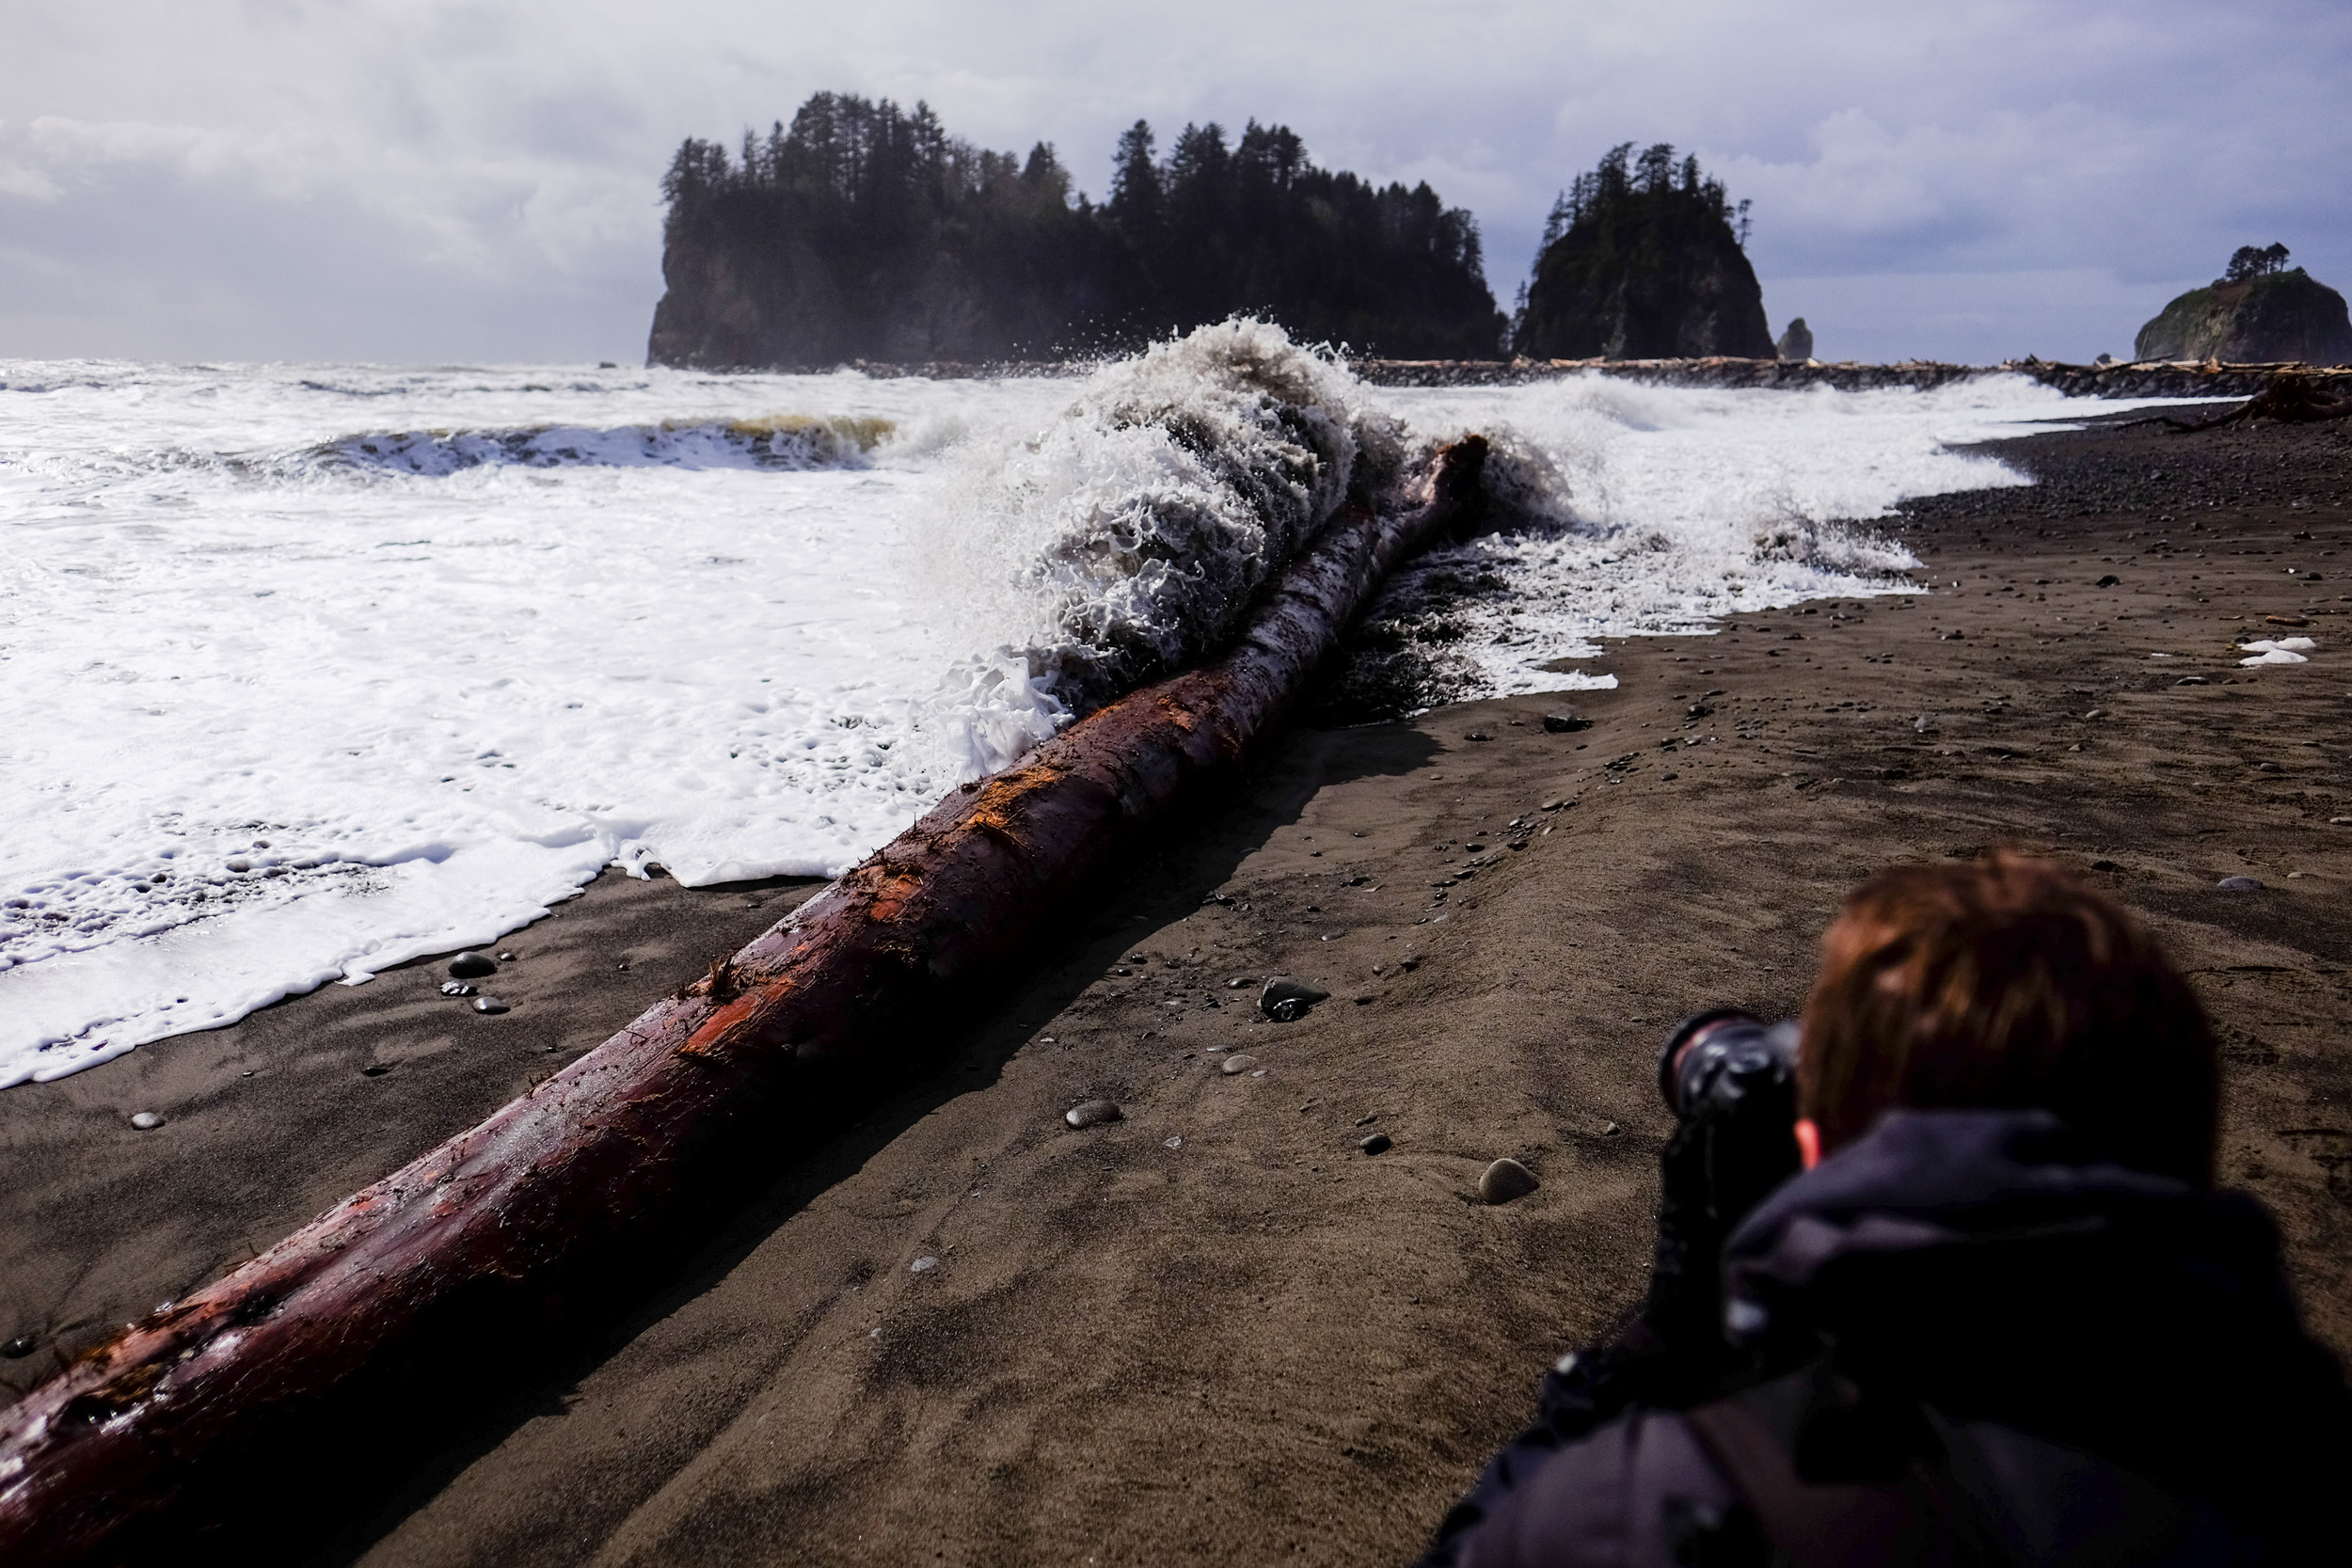  When two photographers try to get shots of a wave hit a log... and then having to run back to avoid getting soaked. 